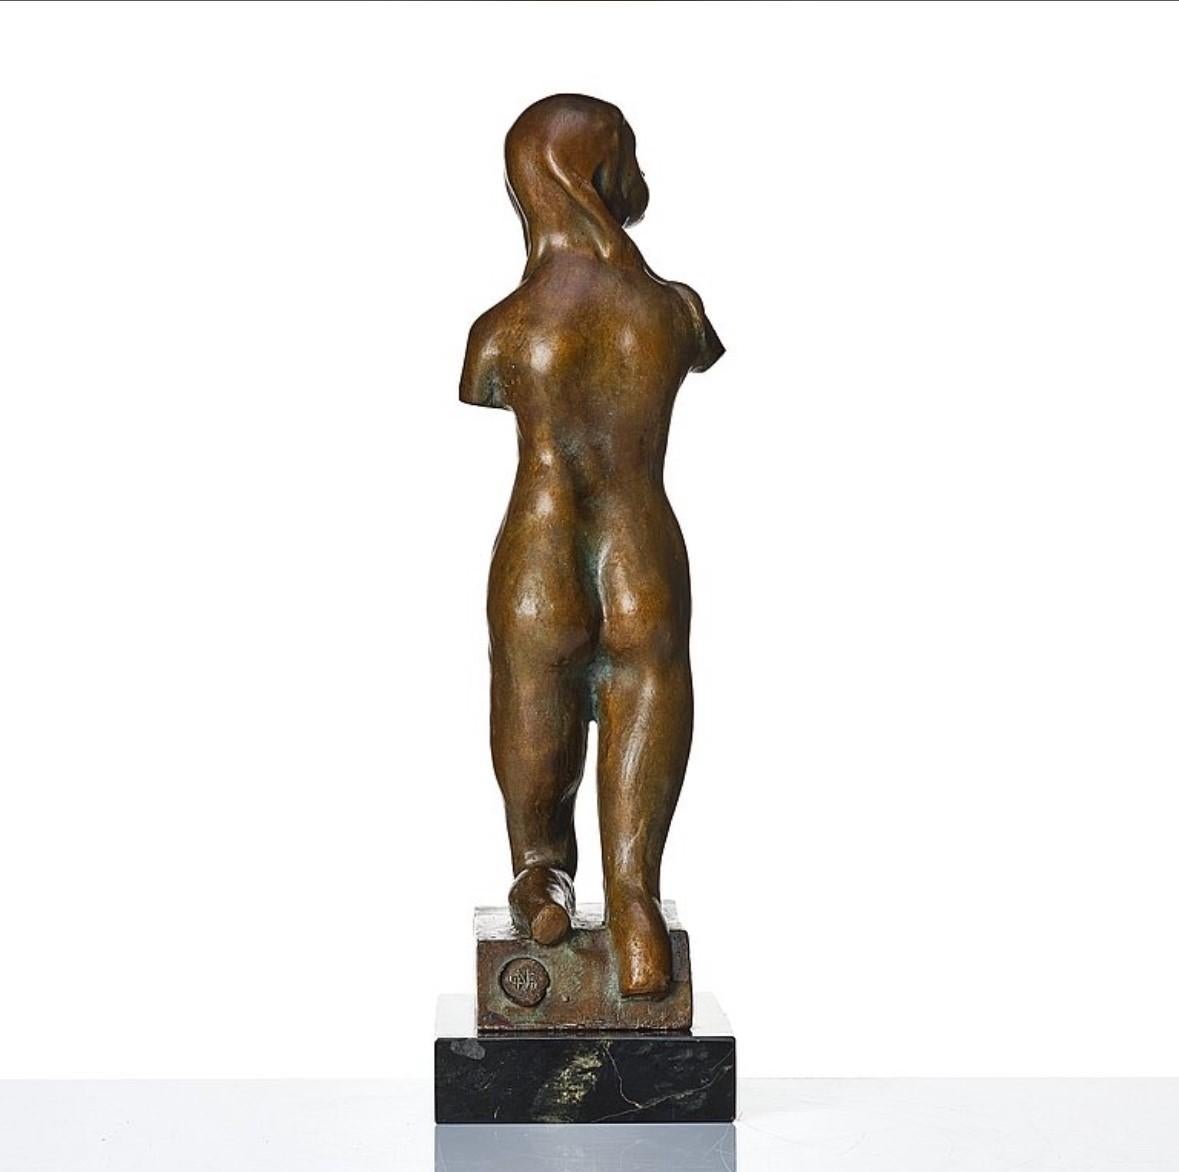 Gunnar Knut Nilsson, born 1904 in Karlskrona, died 1995 in Versailles in France, was a Swedish sculptor. Gunnar Nilsson studied watercolor painting and modeling at the Technical Vocational School in Karlskrona in 1918-19 and on his own in addition